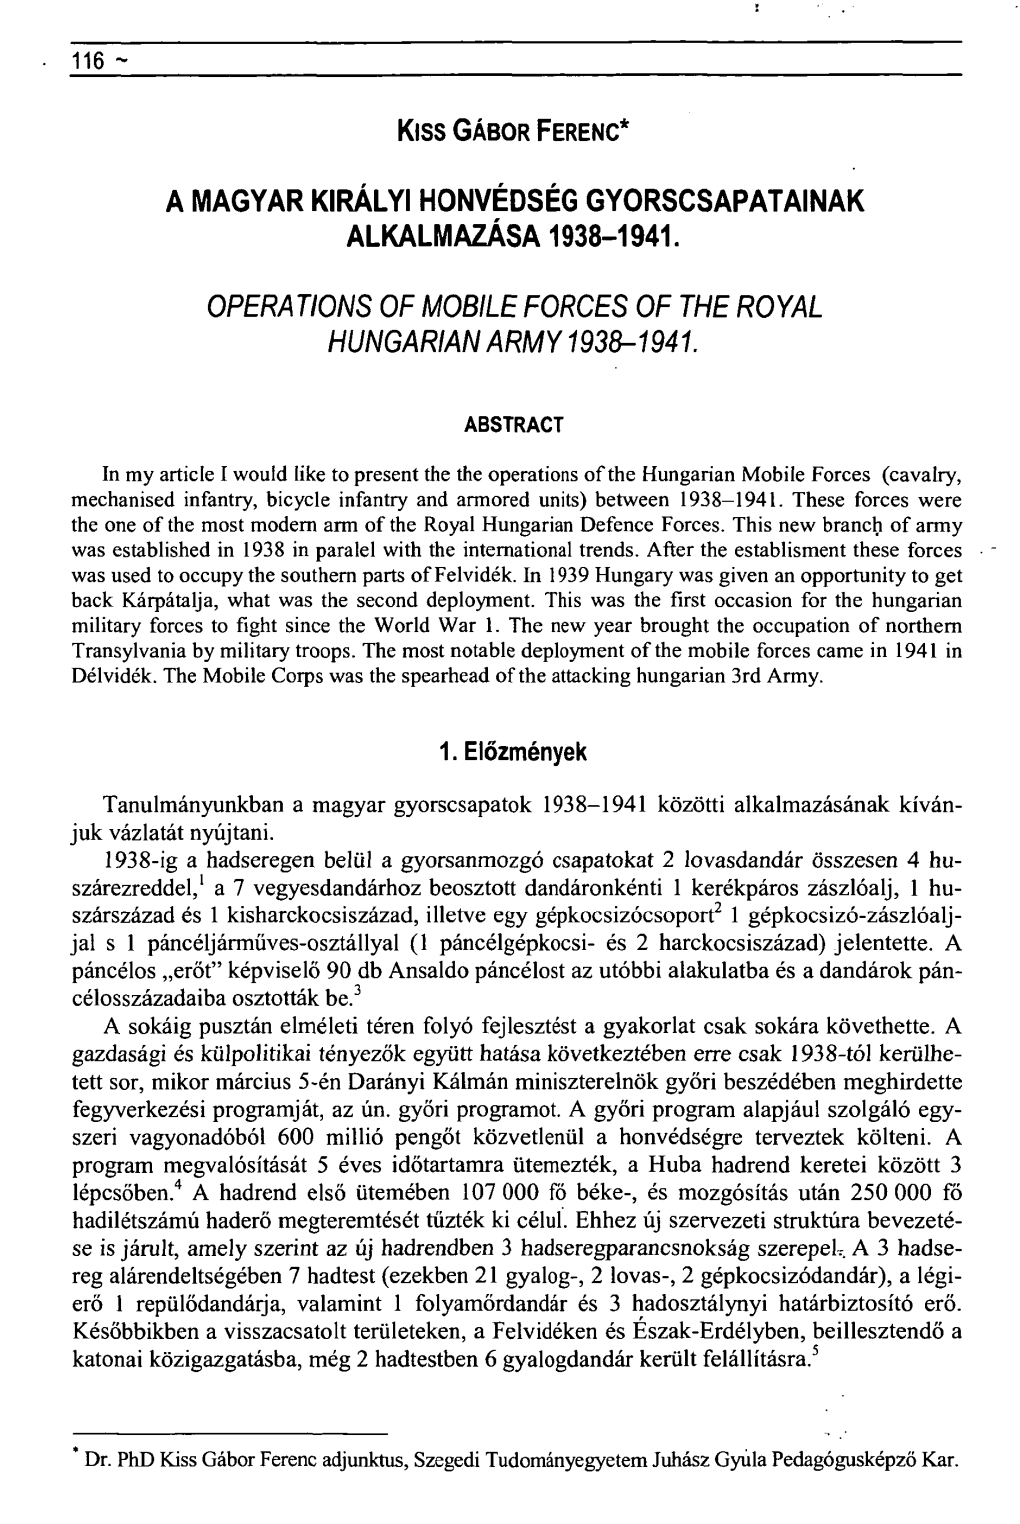 Operations of Mobile Forces of the Royal Hungárián Army1938-1941